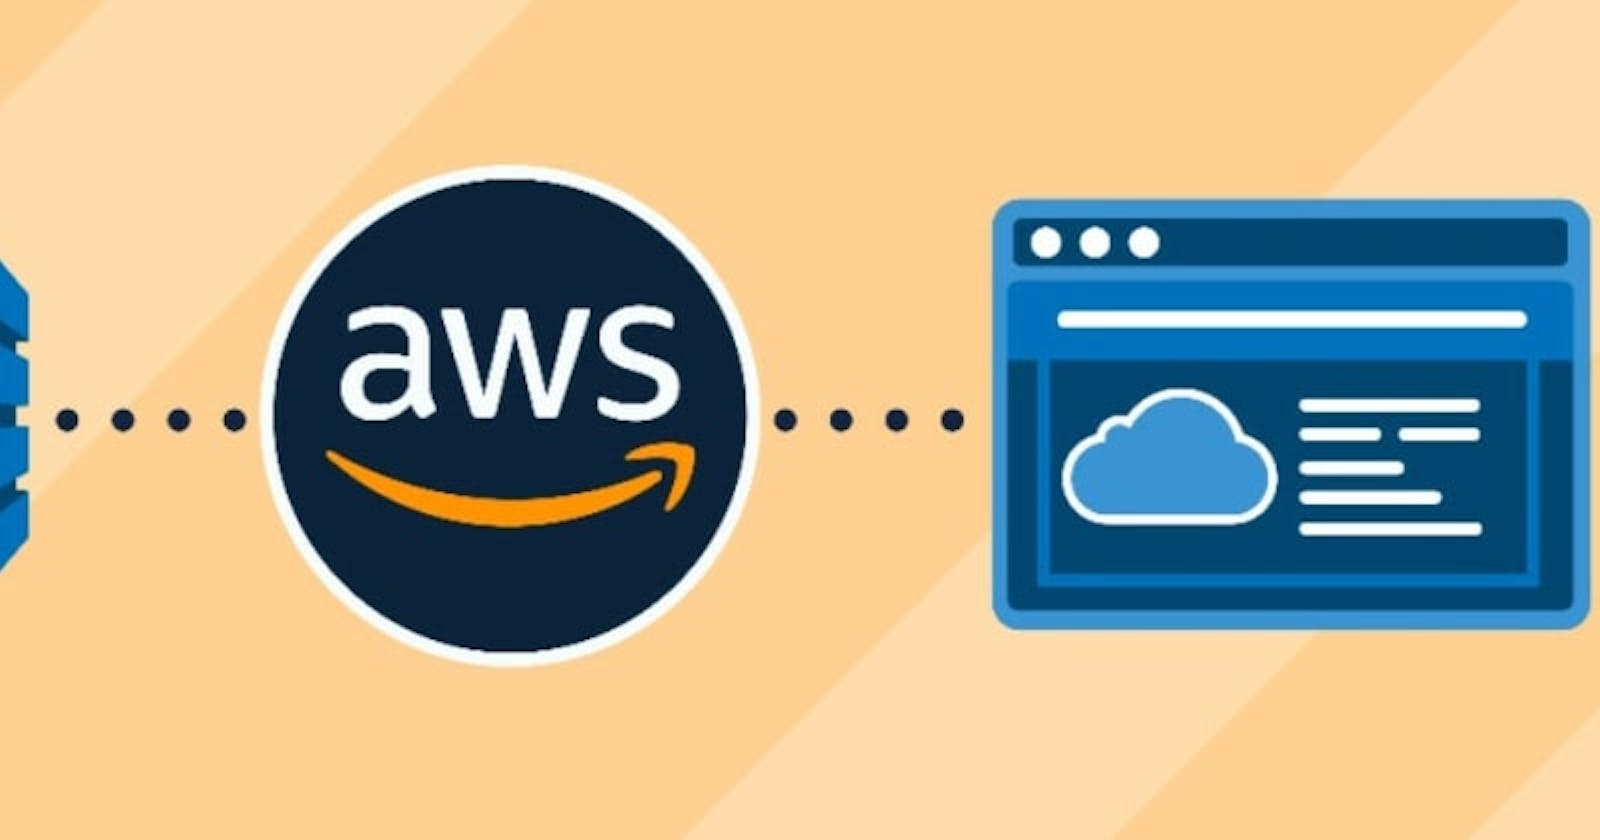 5 AWS courses to help take your skills to the next level